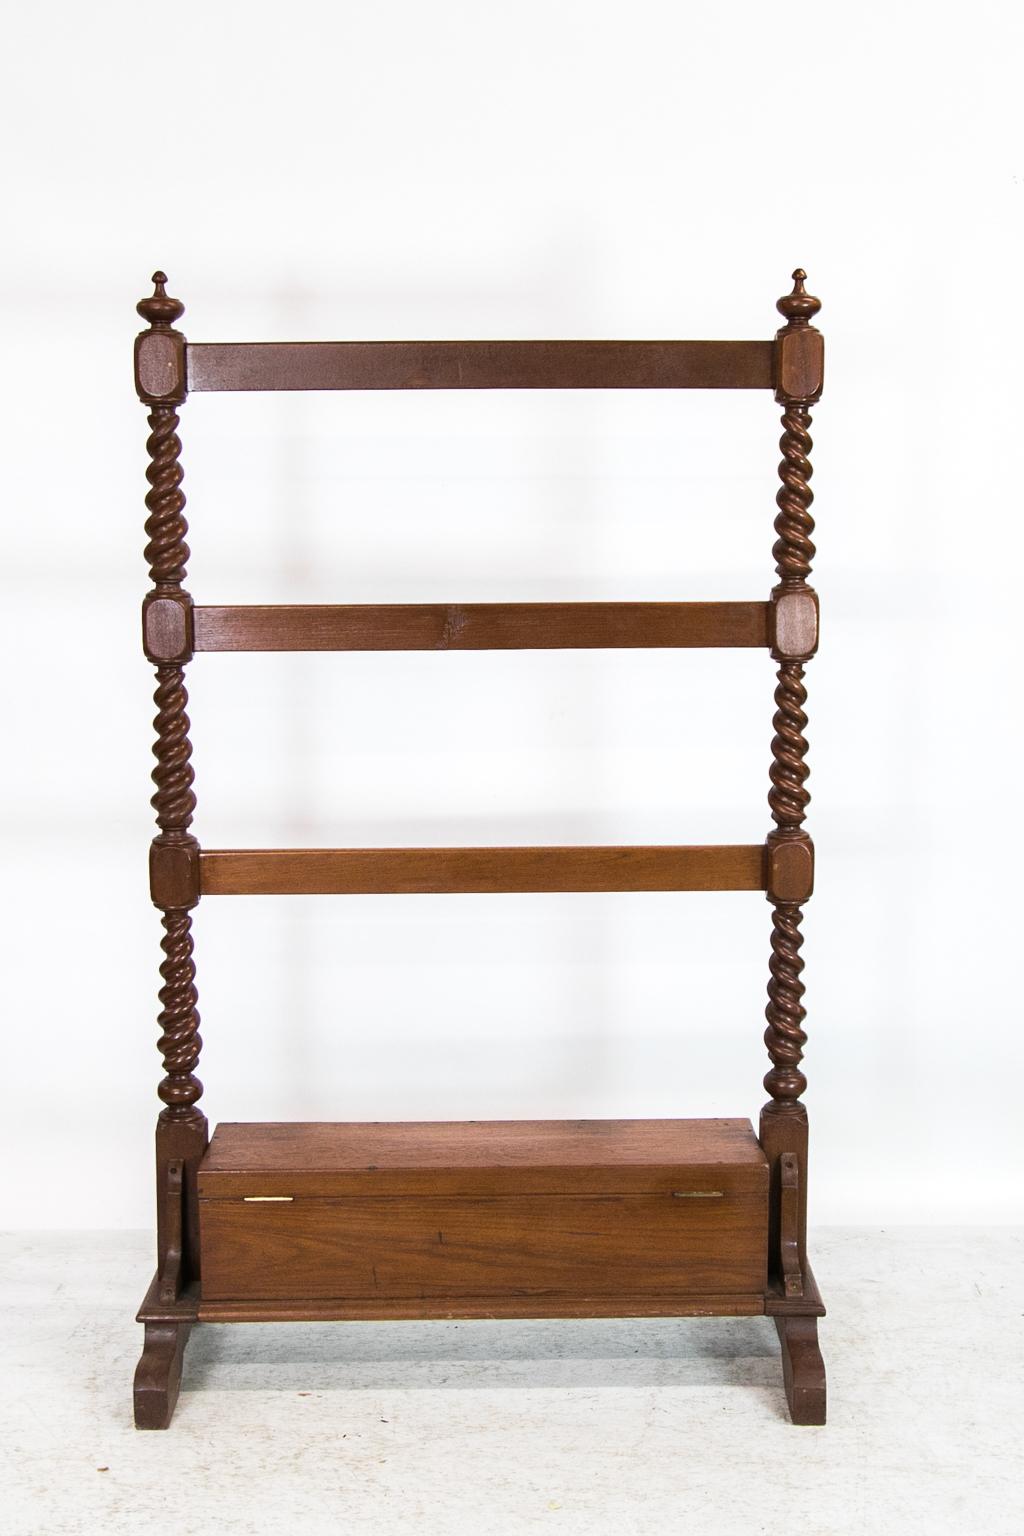 This rack/chest has three cross rails supported by bold barley twist columns. It has a lift top box that rests on a platform base which is supported by four shaped feet.